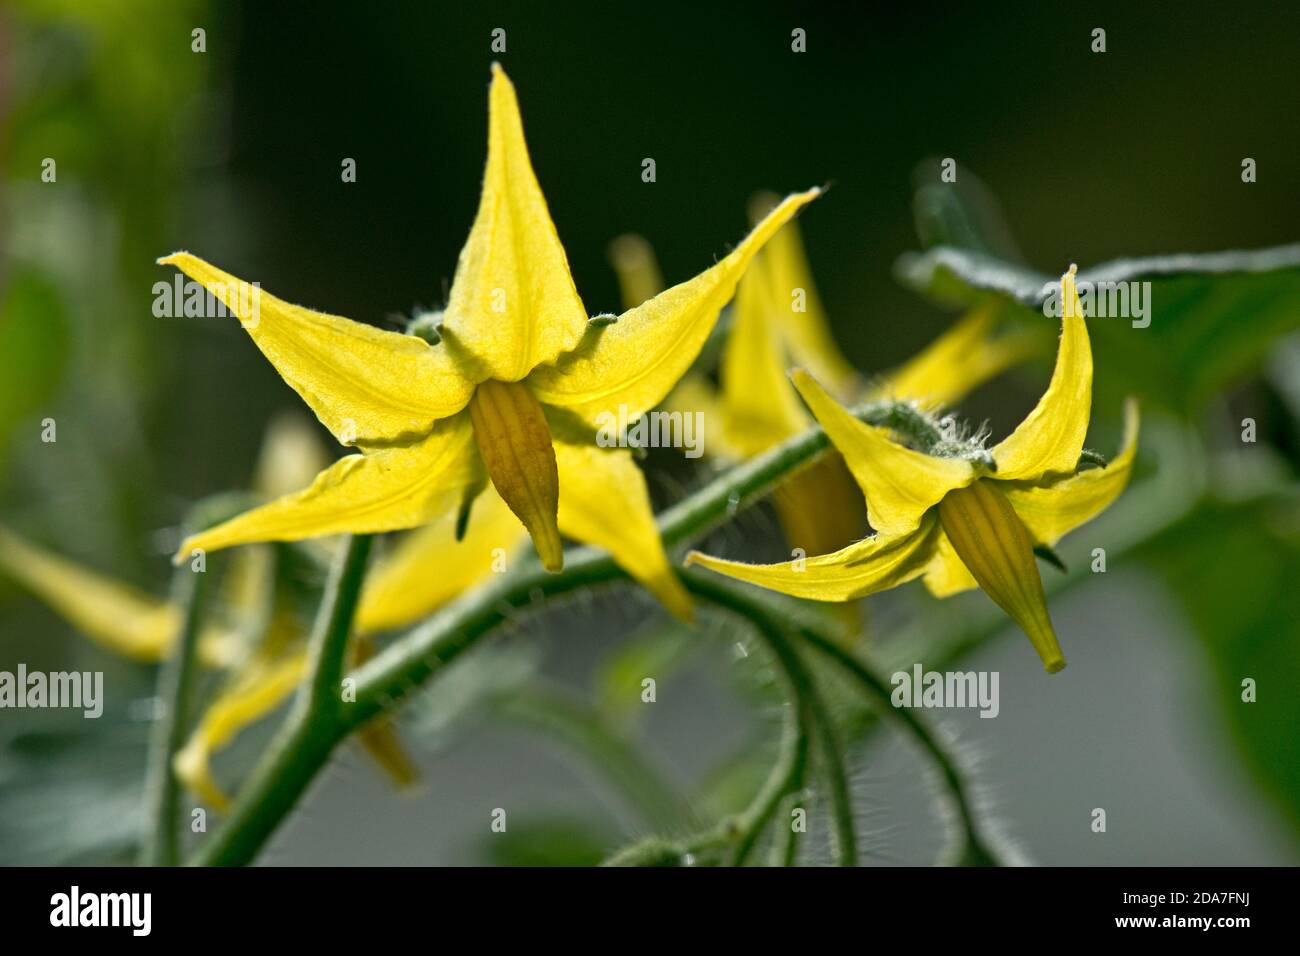 Individual yellow tomato (Solanum lycopersicum) flowers recurved petals with green sepals and closed anthers on glasshouse plant, Berkshire, June Stock Photo